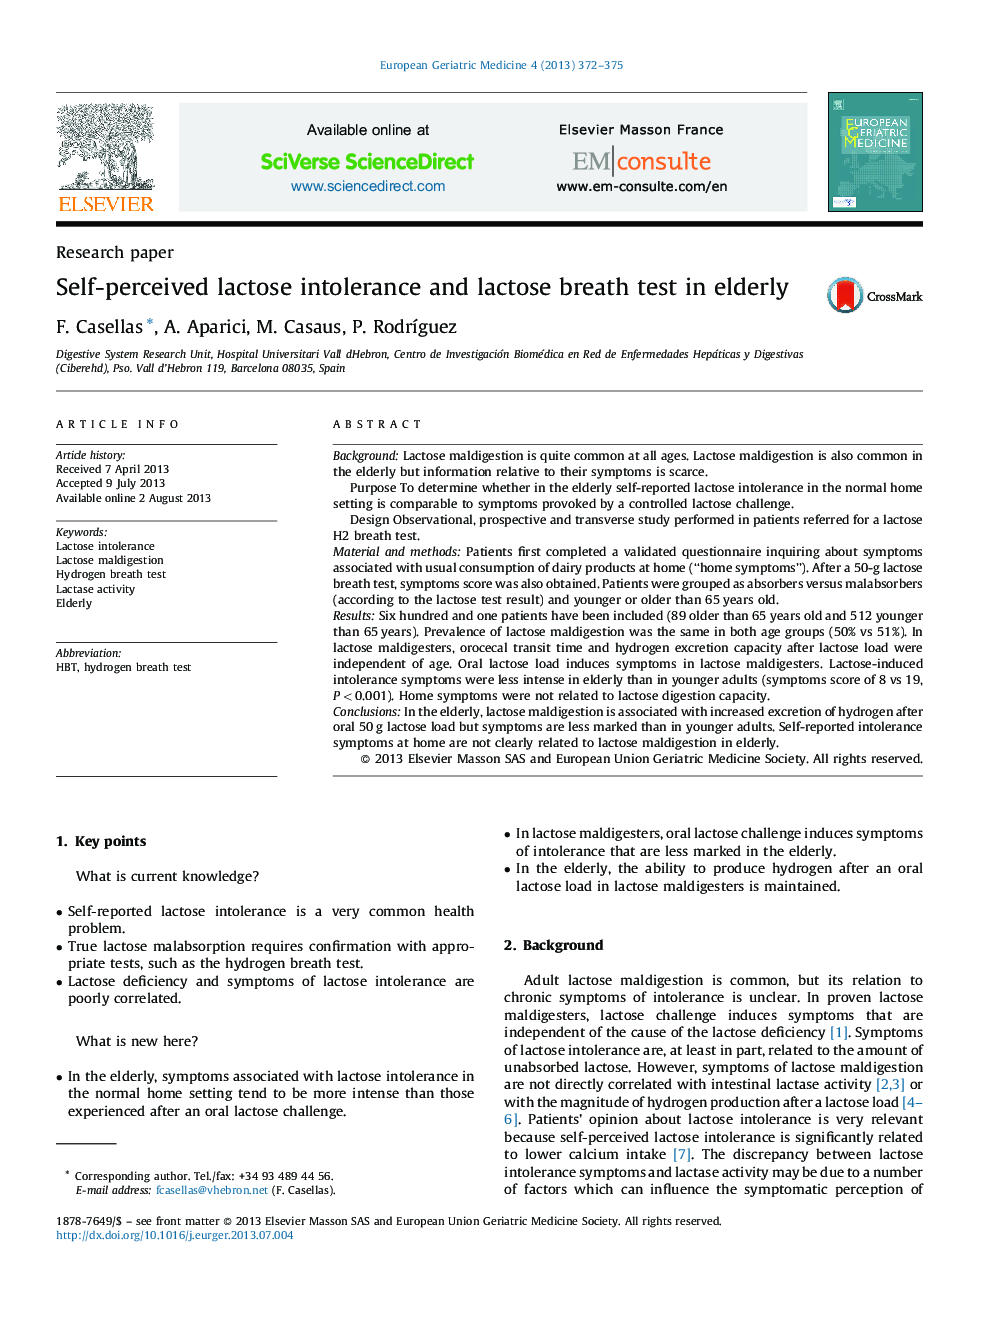 Self-perceived lactose intolerance and lactose breath test in elderly